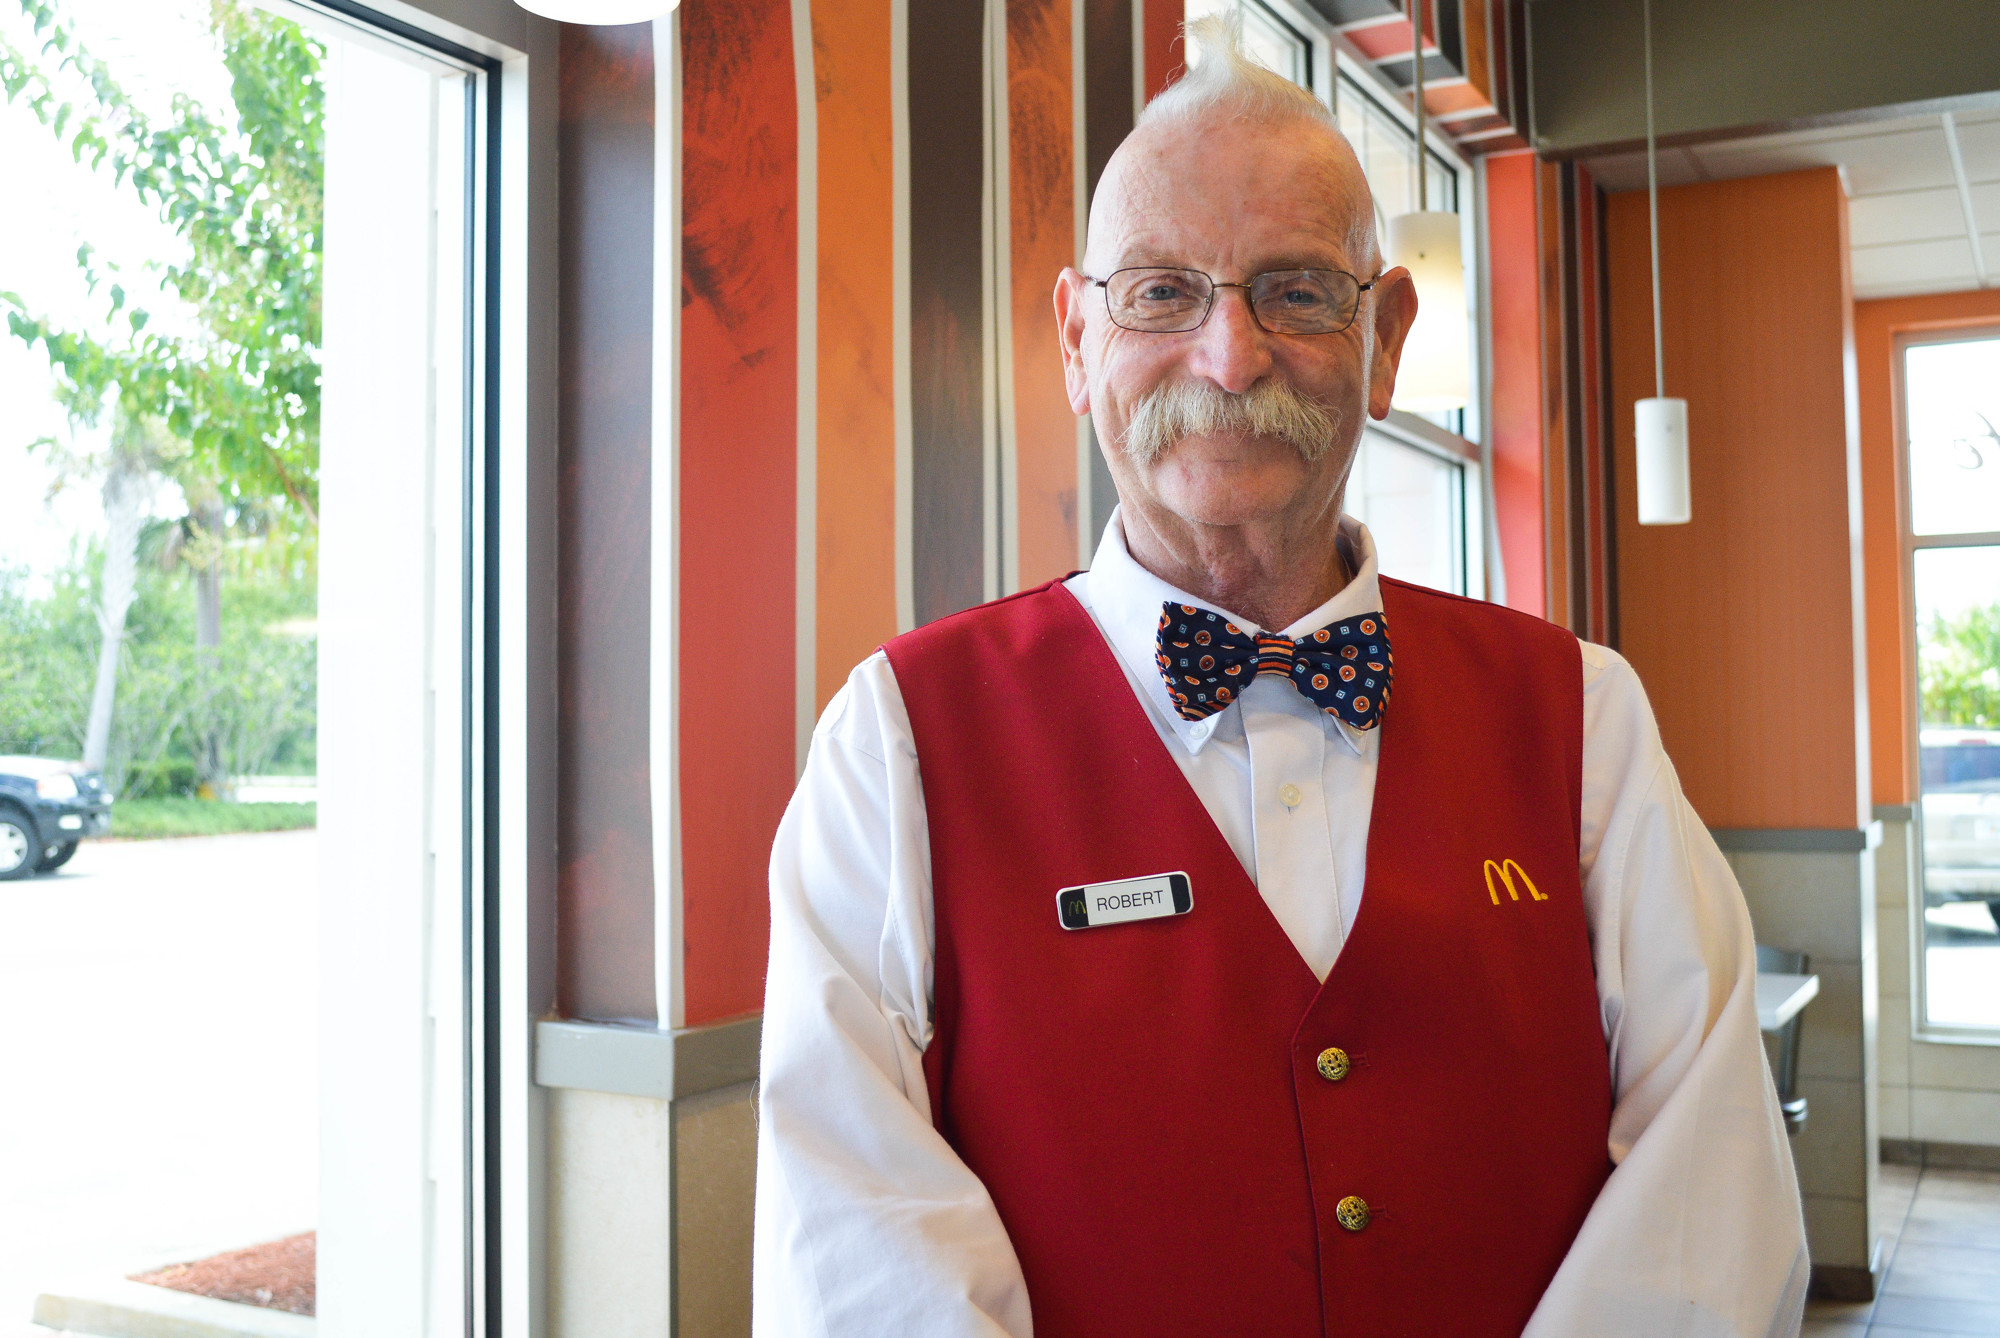 Robert MacDonald, 66, works at the McDonald's at 5190 State Road 100. Photo by Paige Wilson